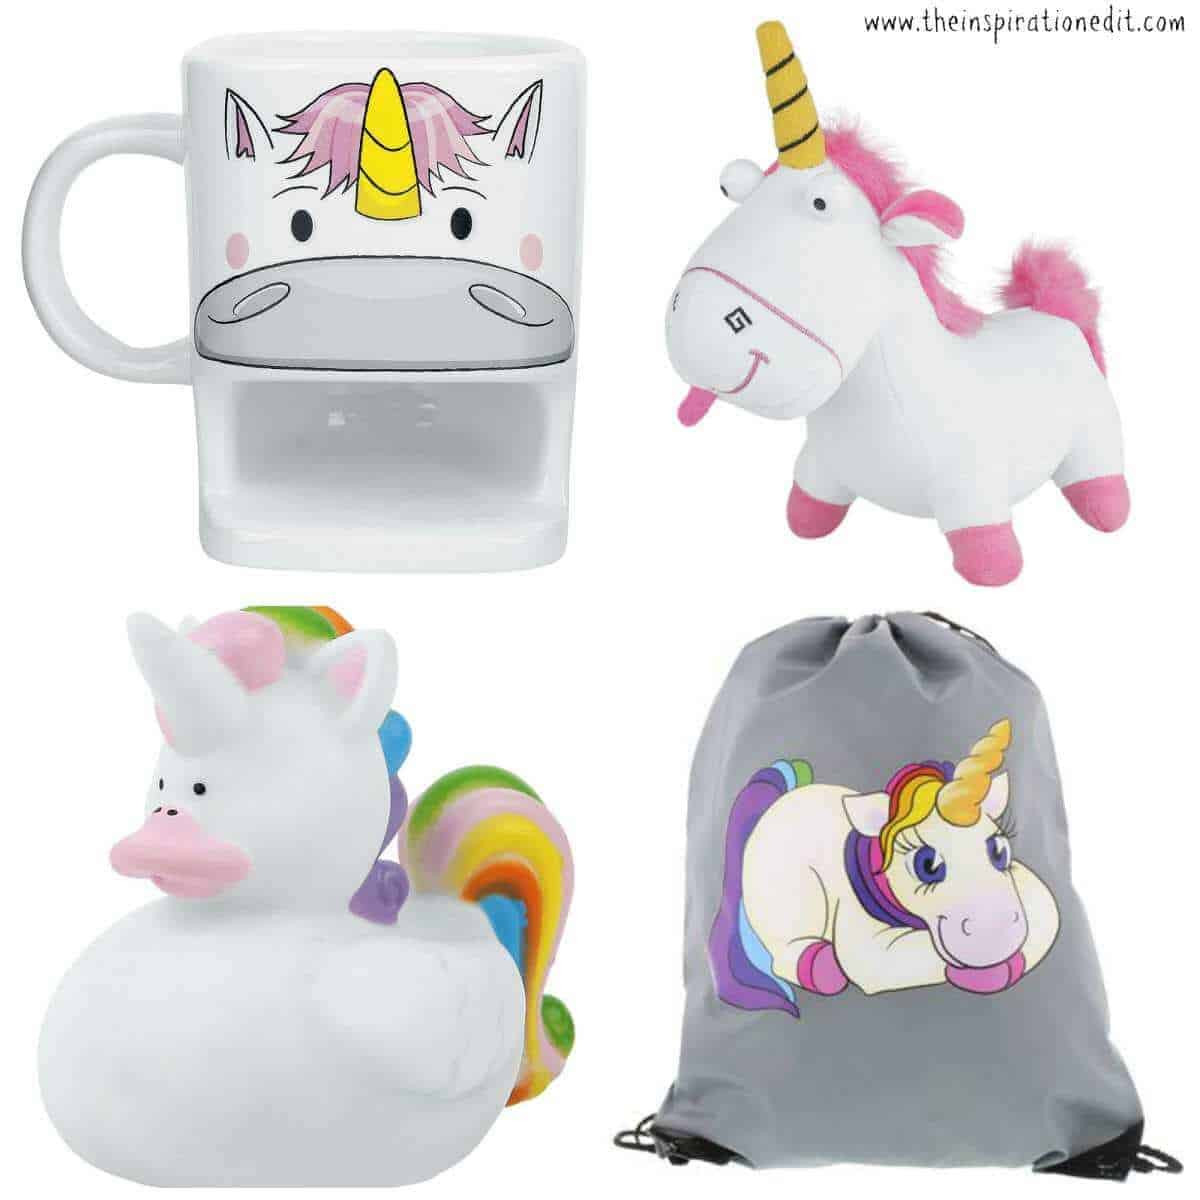 Unicorn Gifts For Kids
 Funky Unicorn Gifts For Kids · The Inspiration Edit